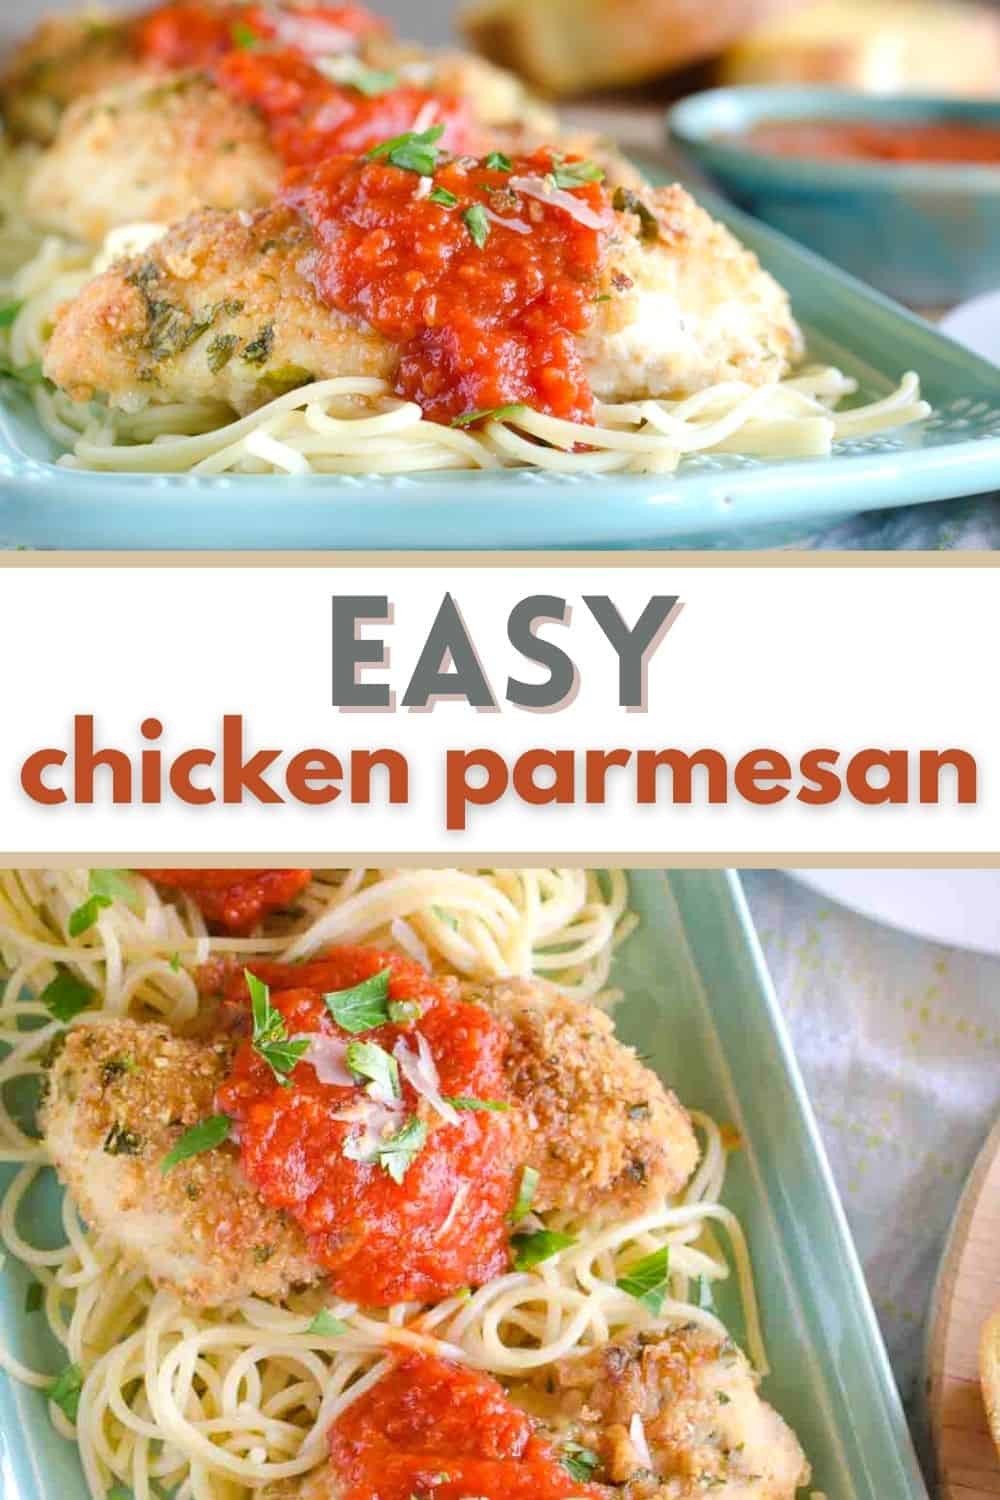 This Chicken Parmesan recipe is an easy dinner you can throw together any night of the week!  With a few simple ingredients, this crispy coated chicken dish is ready in minutes!